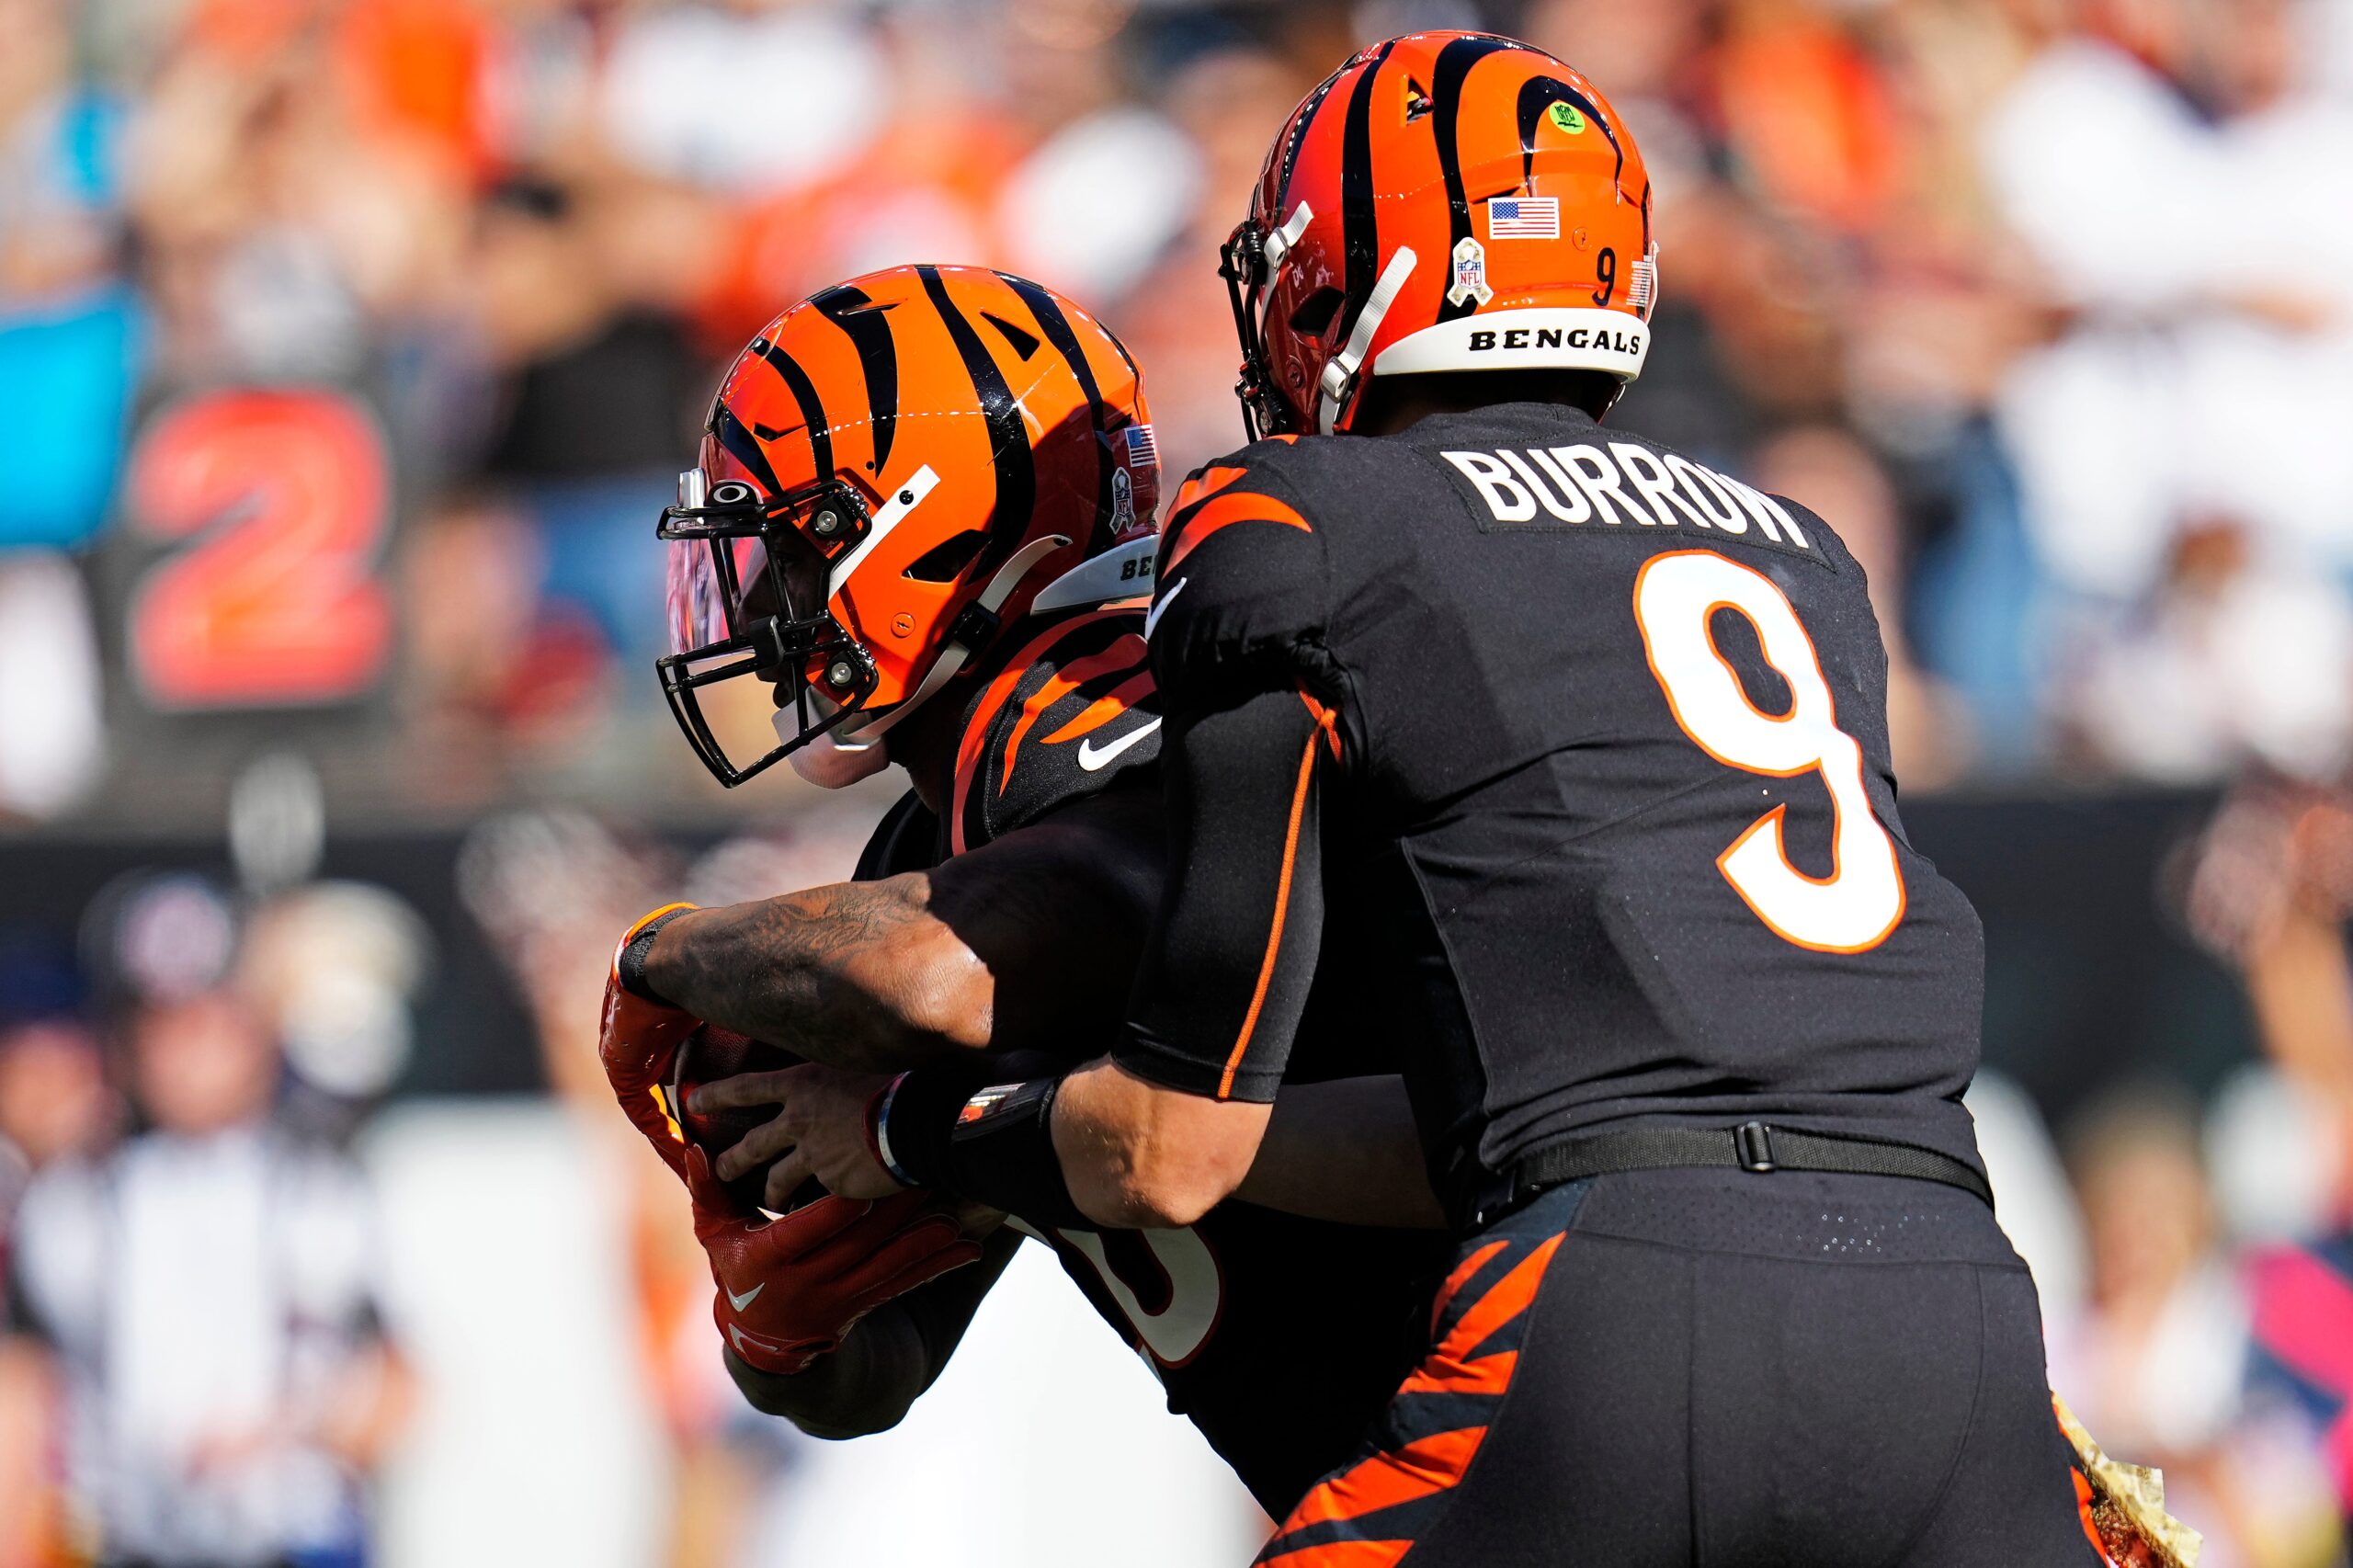 Bengals vs. Steelers Prediction, Pick, Odds, and How To Watch the